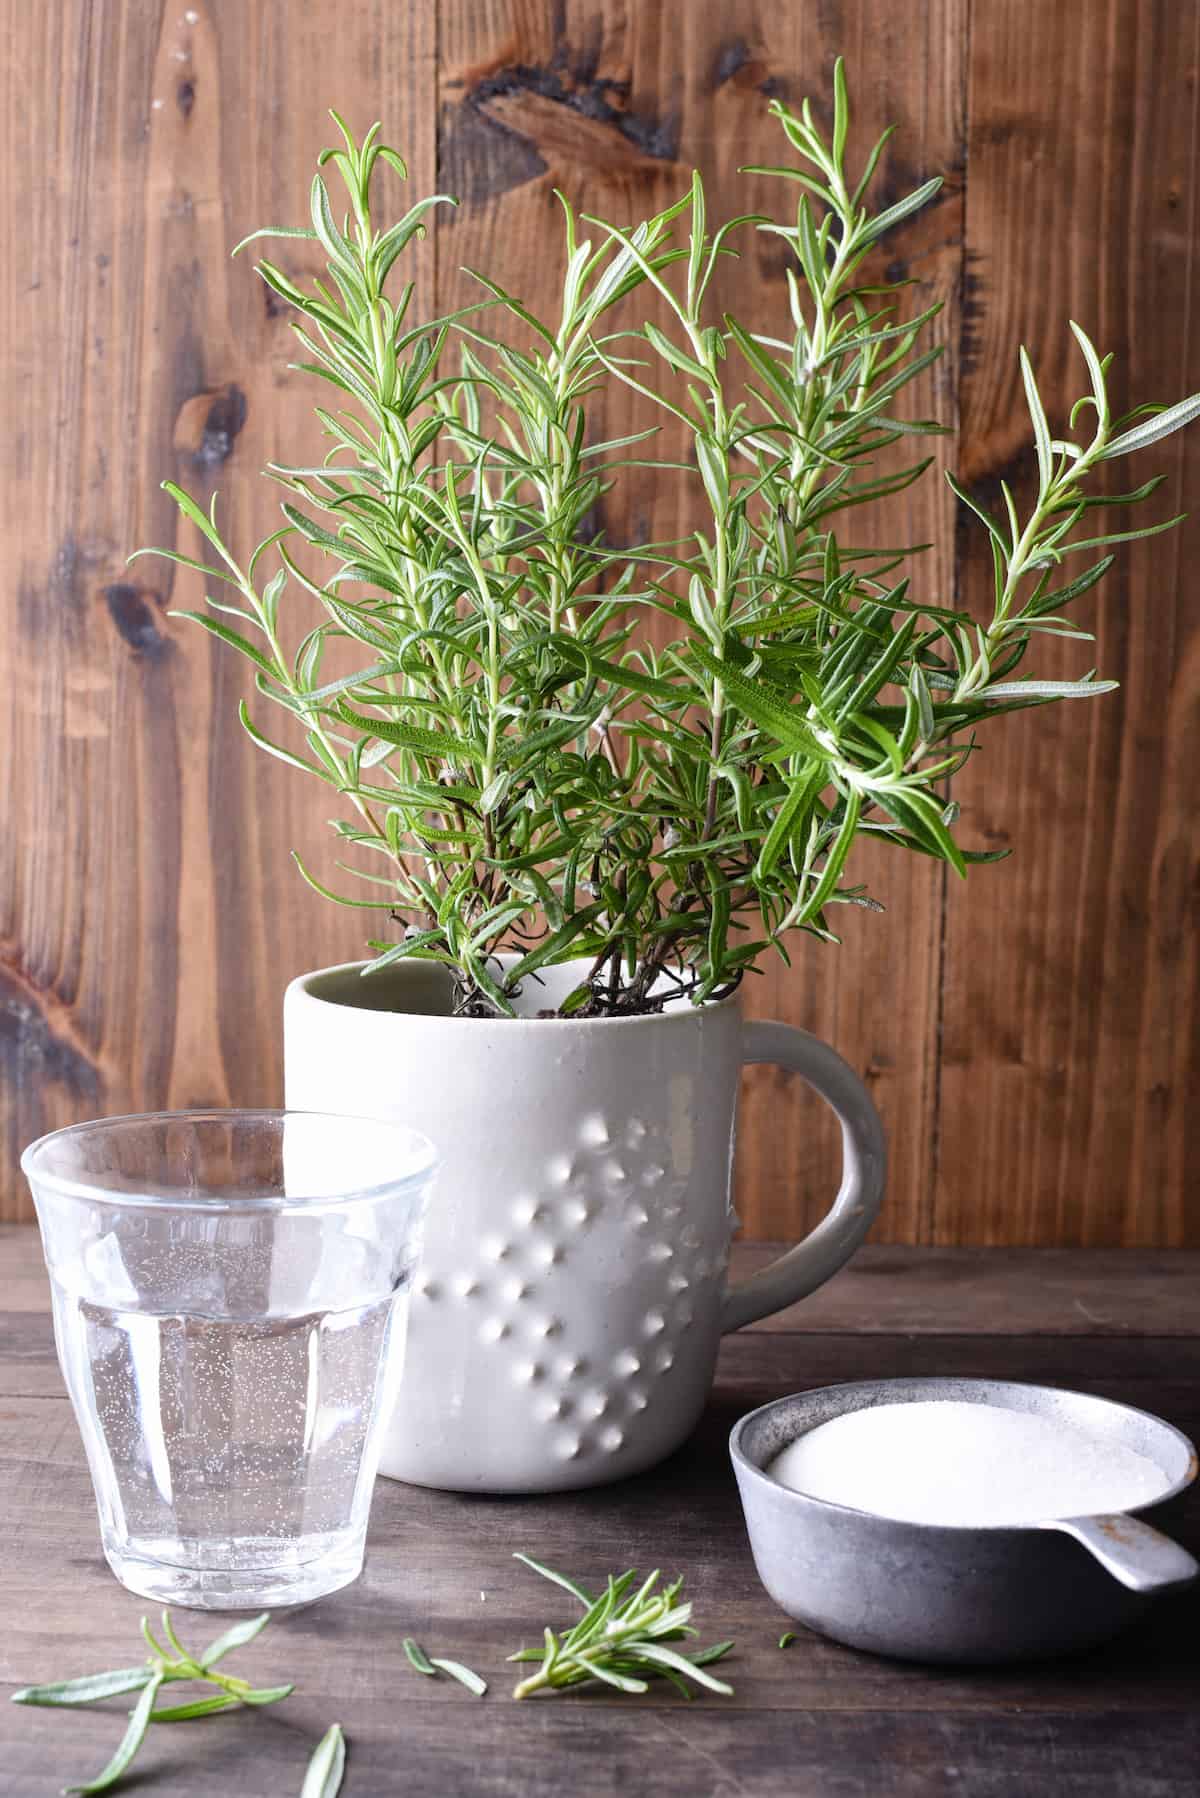 Glass of water, small pine-like plant and cup of white sugar against wooden backdrop.